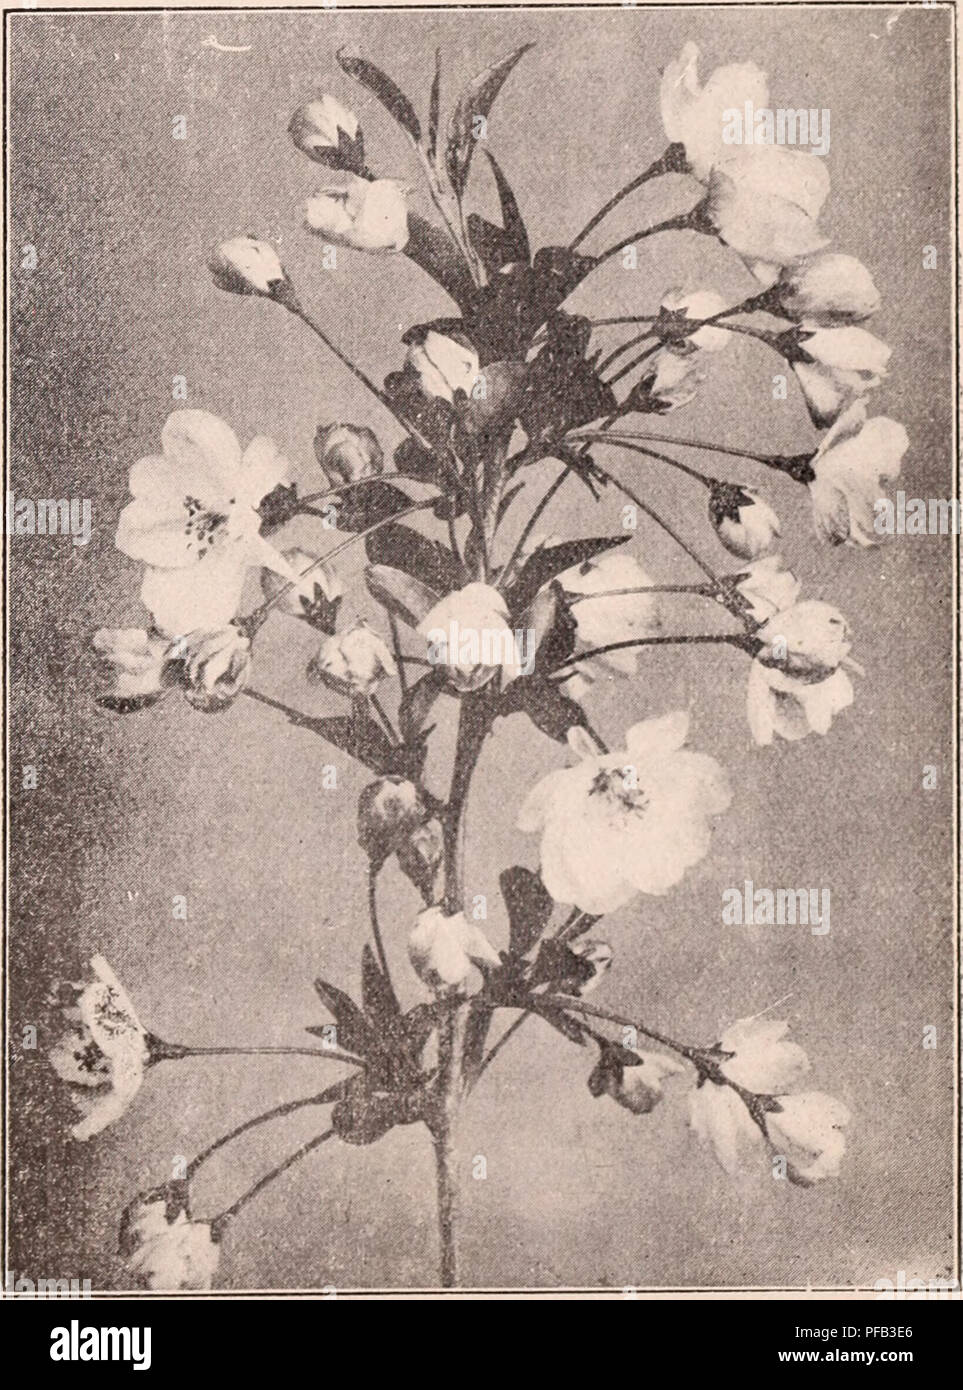 . Descriptive catalogue of flowering, ornamental trees, shrubs, bulbs, herbs, climbers, fruit trees, &amp;c., &amp;c., &amp;c. / for sale by the Yokohama Nursery Co., Limited.. Nursery Catalogue. PYRUS JAPOXrCA wr^TRTi Br.O()^ITX(J Spiraea japonica, pink flower (pot o;i)Wiijâheight: 1-1^ ft.; per 10, $1.50.' Spiraea prunifolia, lovely small white (U)iil)le flowers (potg;rowQ)âheight: l-n ft. ; per 10, $1.50. Spirr.cr. salicifolia, ihis is a beautiful hardy shrub growing to the height of about 3 ft. forming a good bush and fine pauicled pink flower pro- duced in t'arly simimerâeach 25 c ; per  Stock Photo